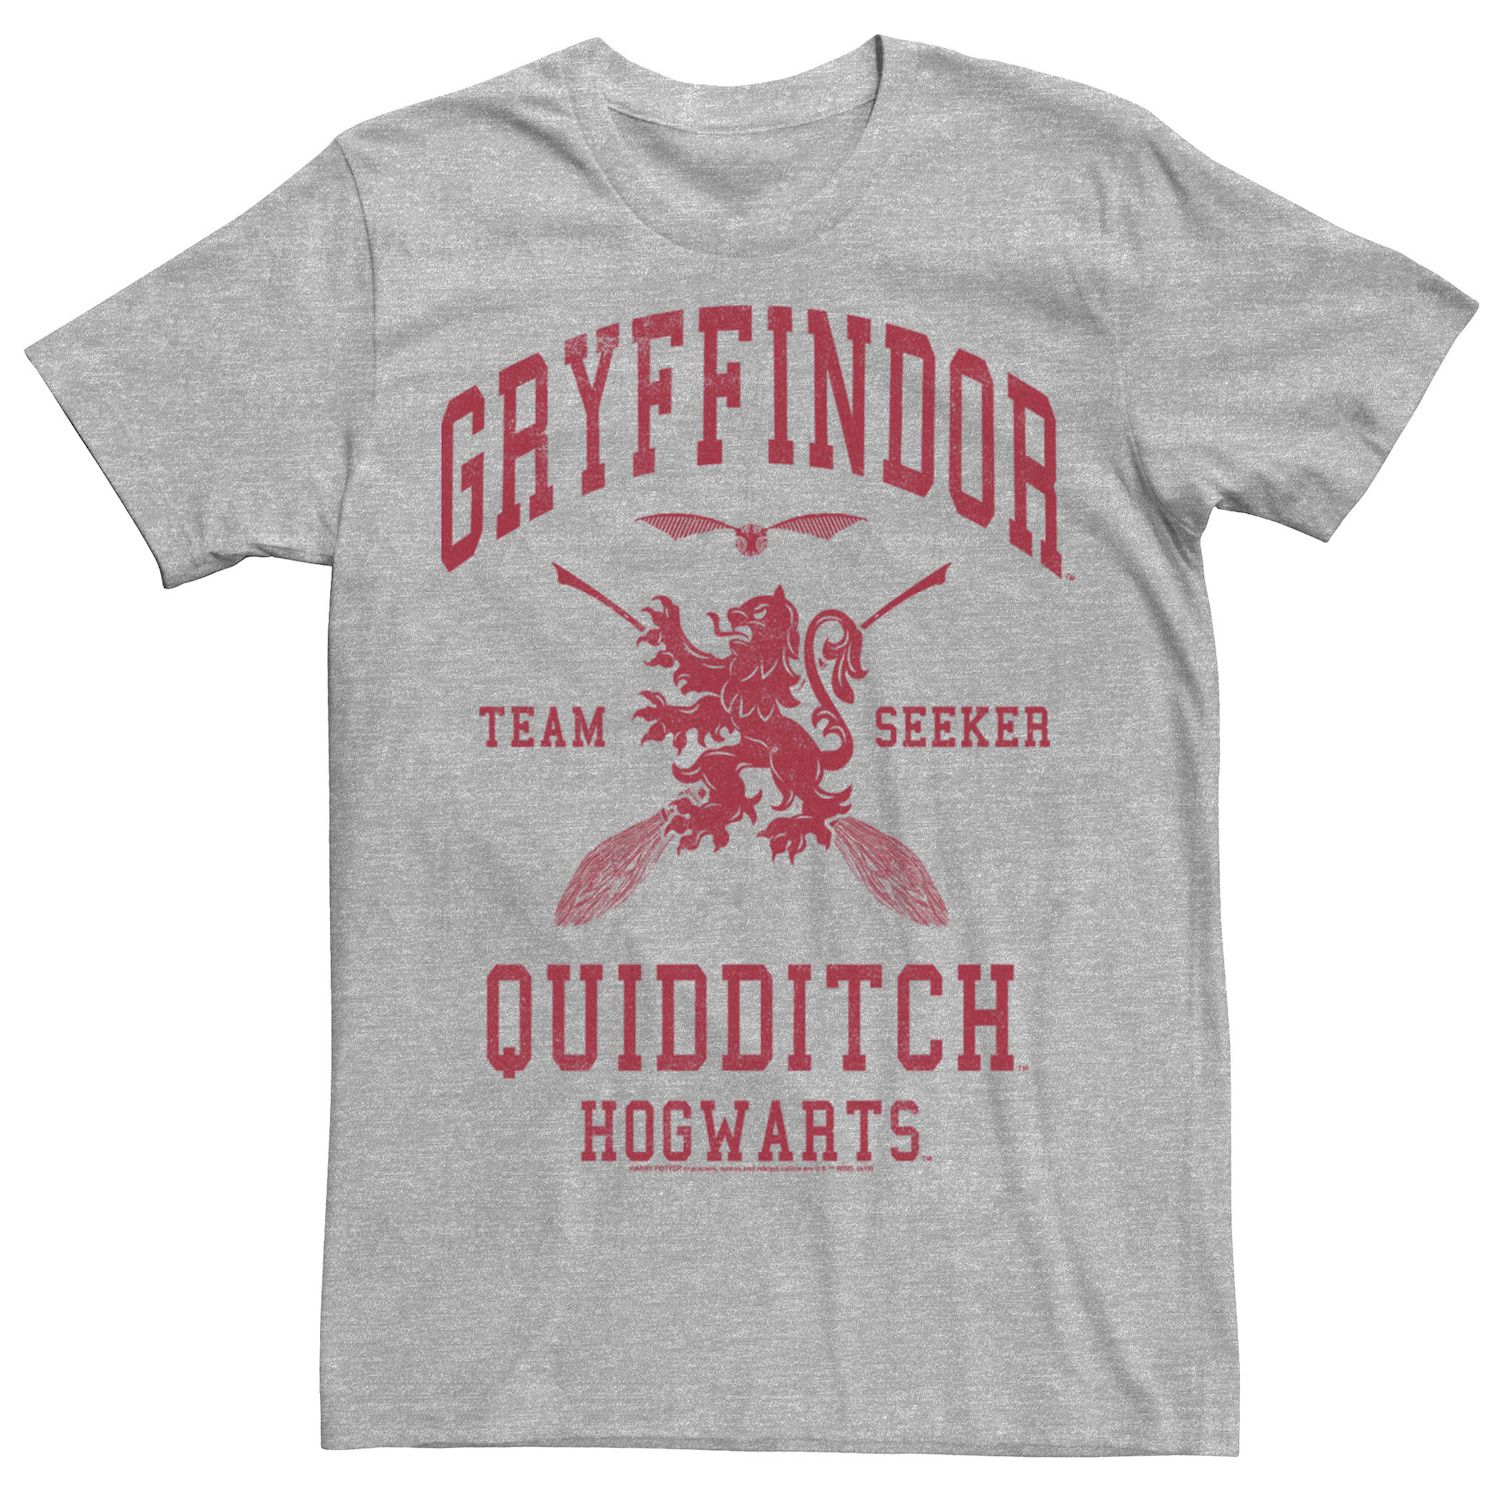 Image for Harry Potter Men's Deathly Hallows 2 Gryffindor Quidditch Team Seeker Jersey Tee at Kohl's.